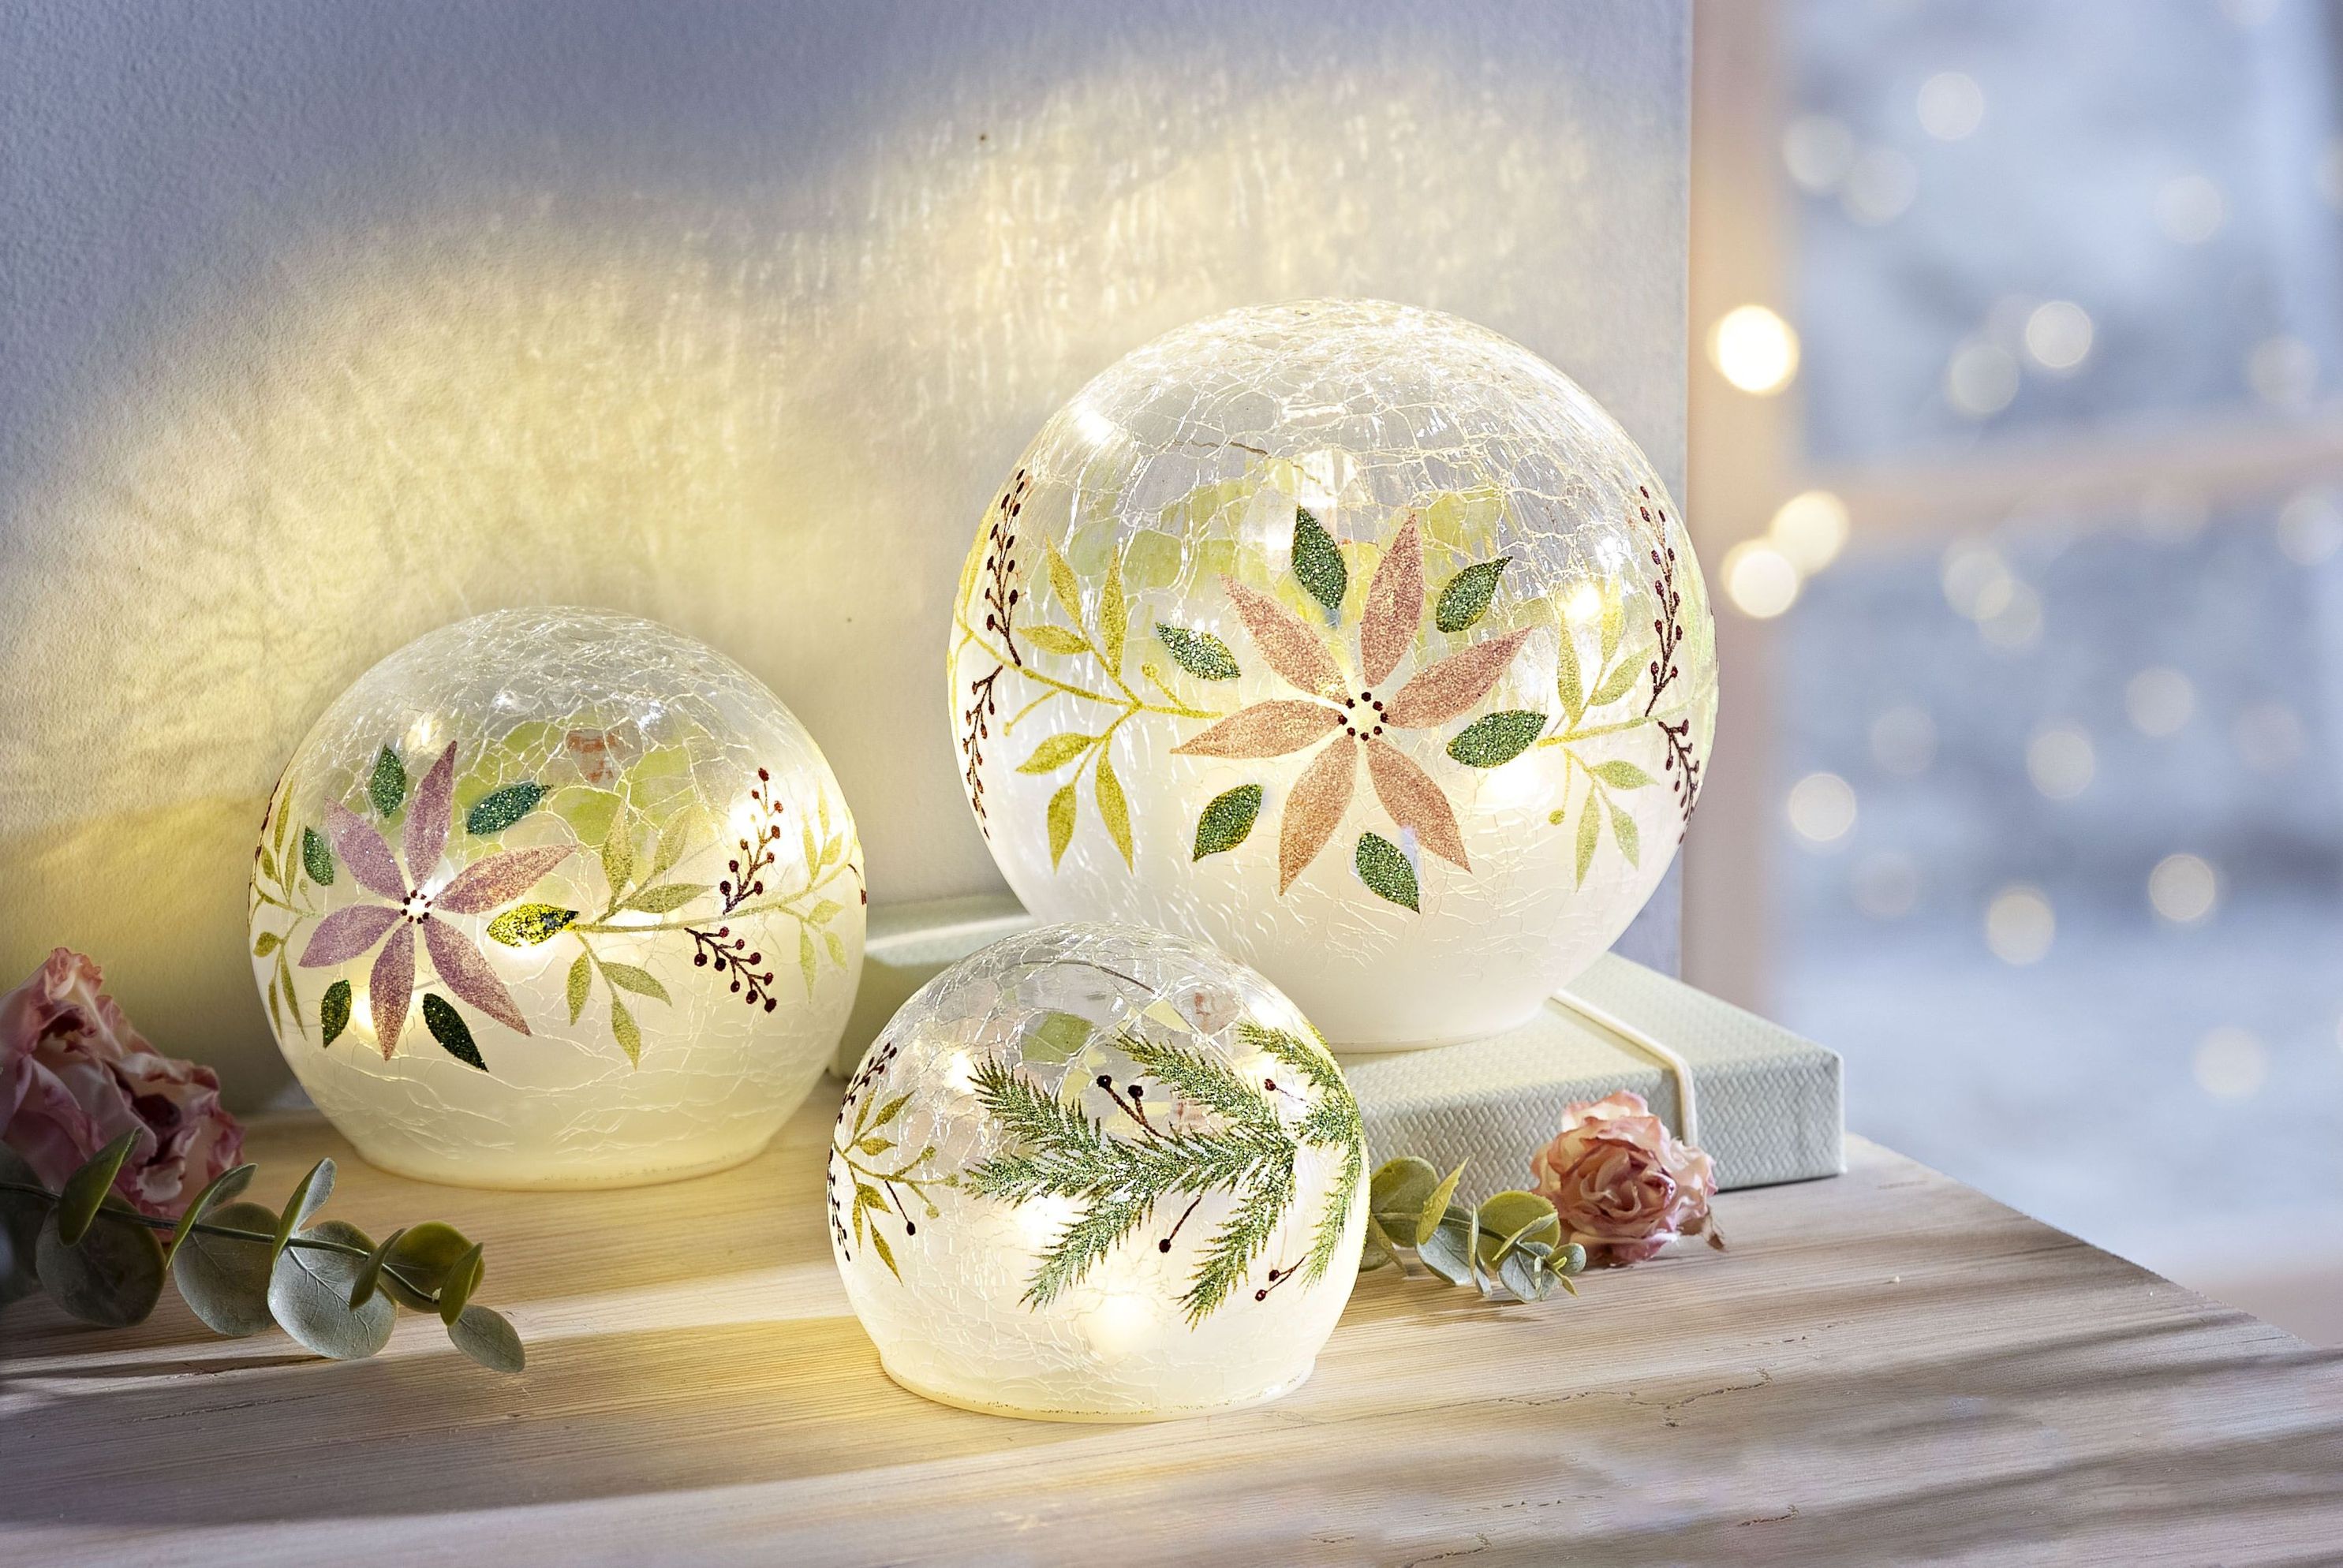 Snowflake Frosted White LED Lighted Glass Globe Set